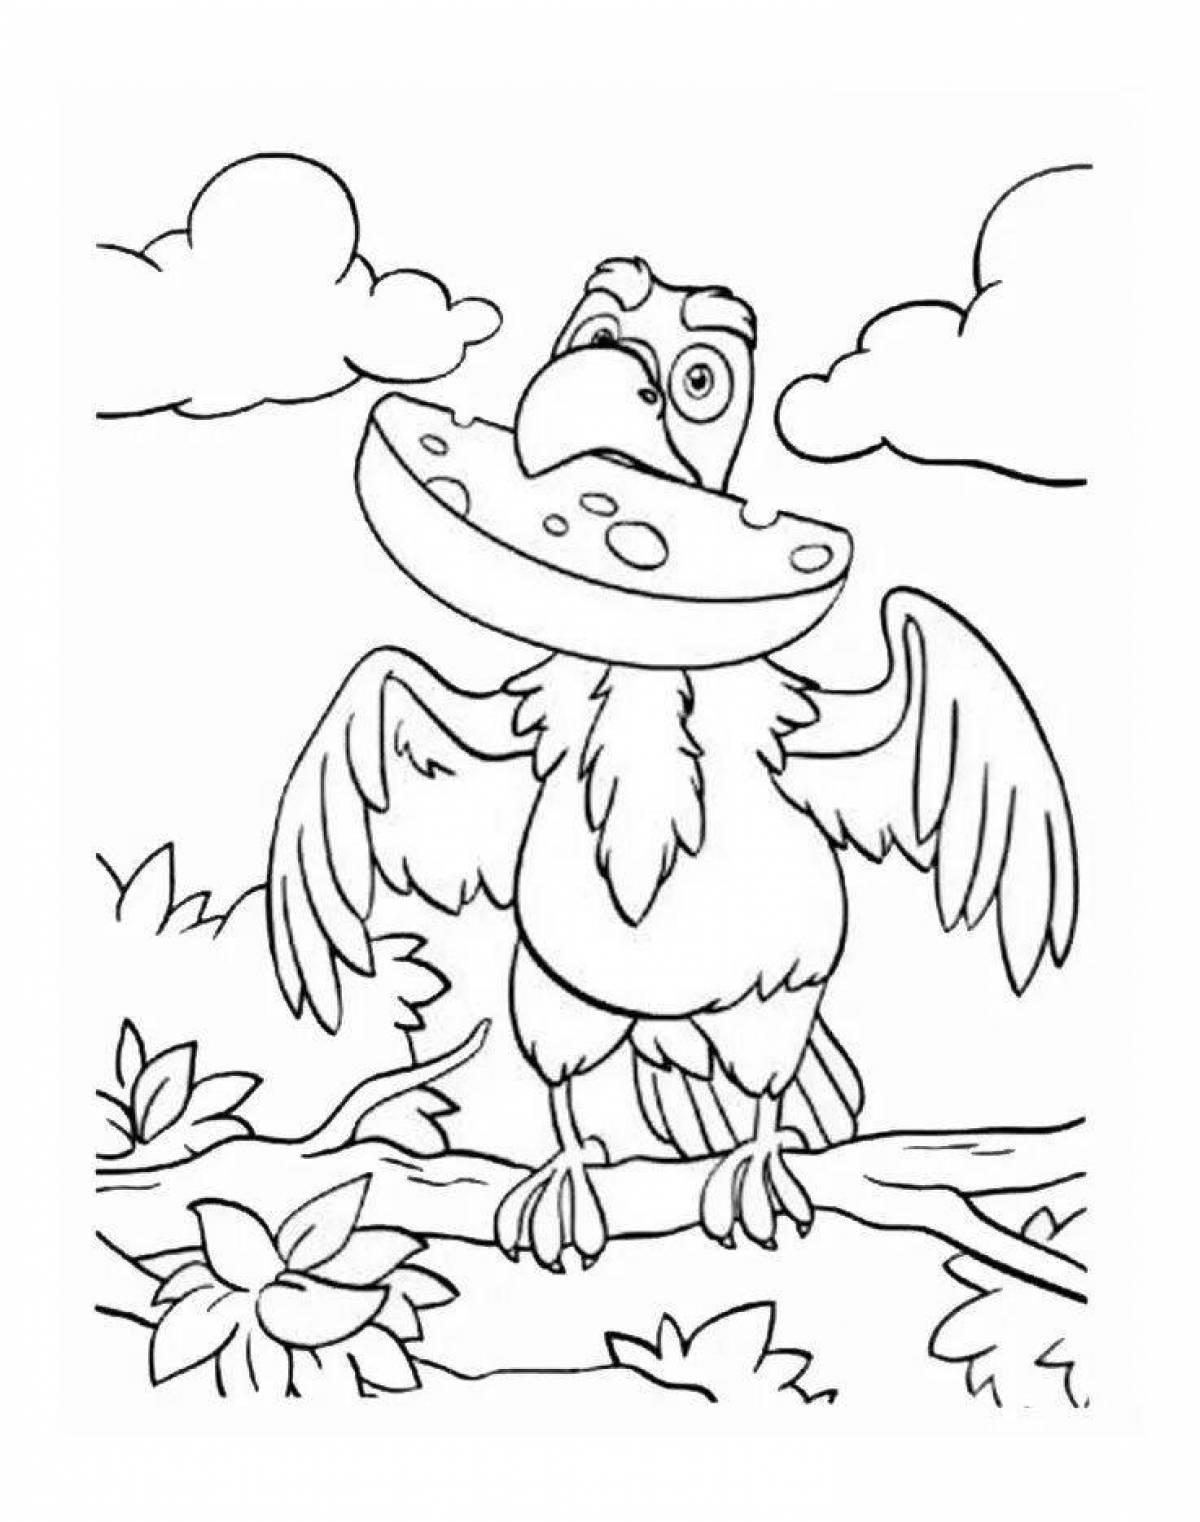 Fancy crow and fox coloring book